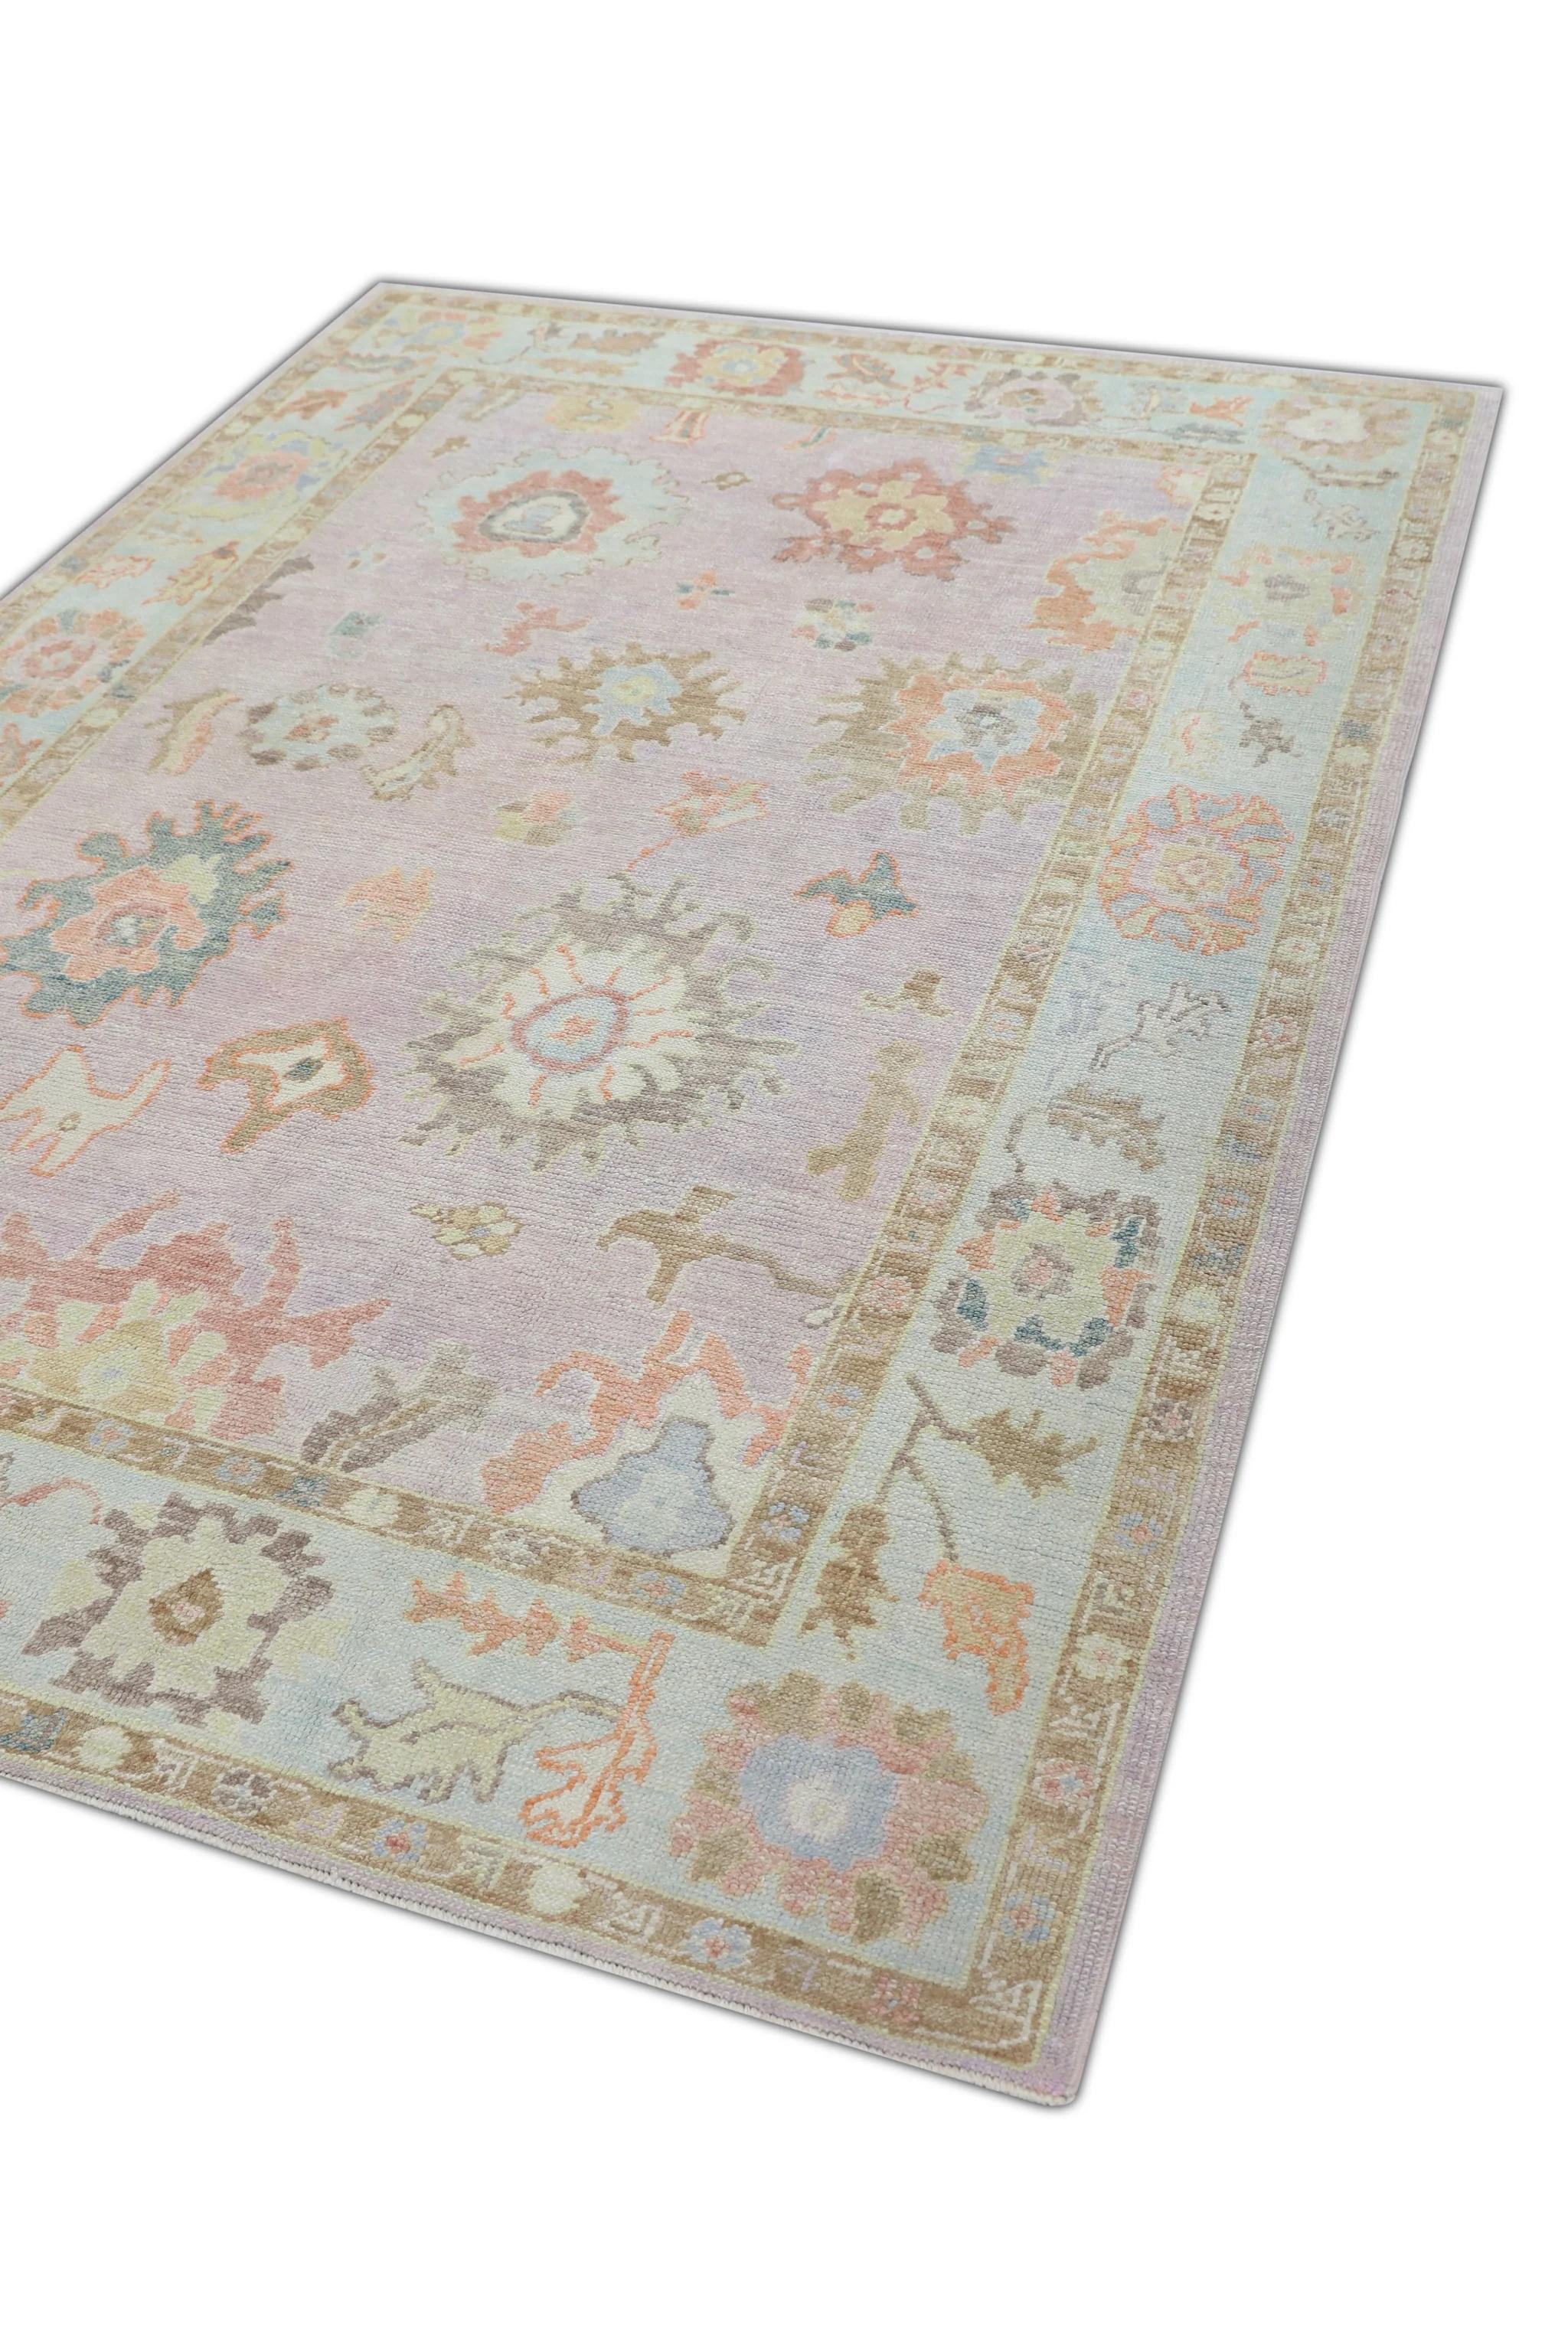 Contemporary Pink and Blue Floral Design Handwoven Wool Turkish Oushak Rug 6'2